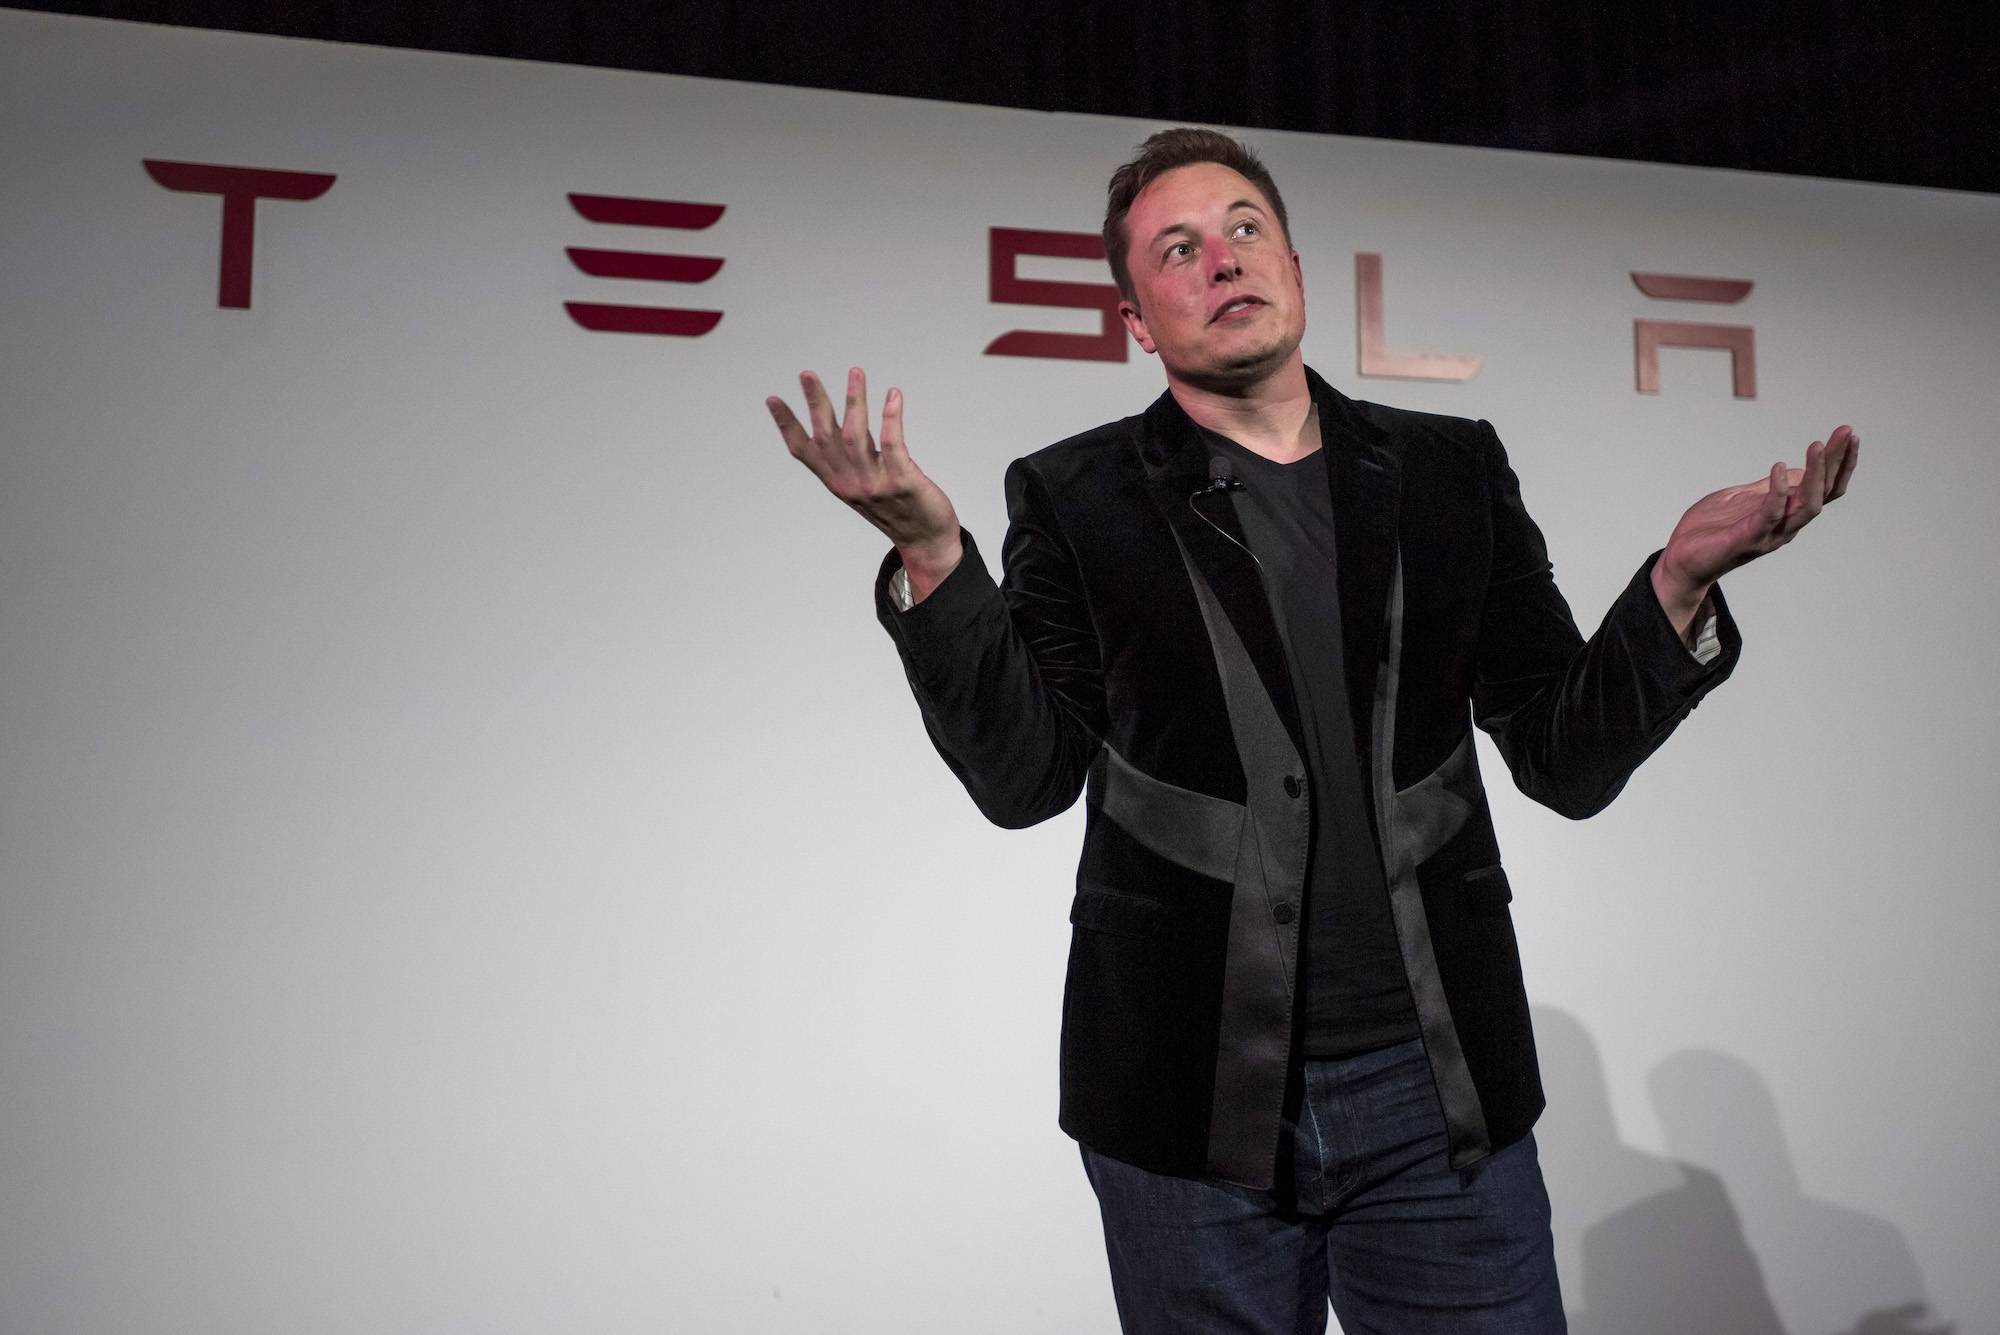 Elon Musk, chairman and chief executive officer of Tesla Motors, speaks during a press conference prior to unveiling the Model X SUV during an event in Fremont, California, on September 29, 2015.